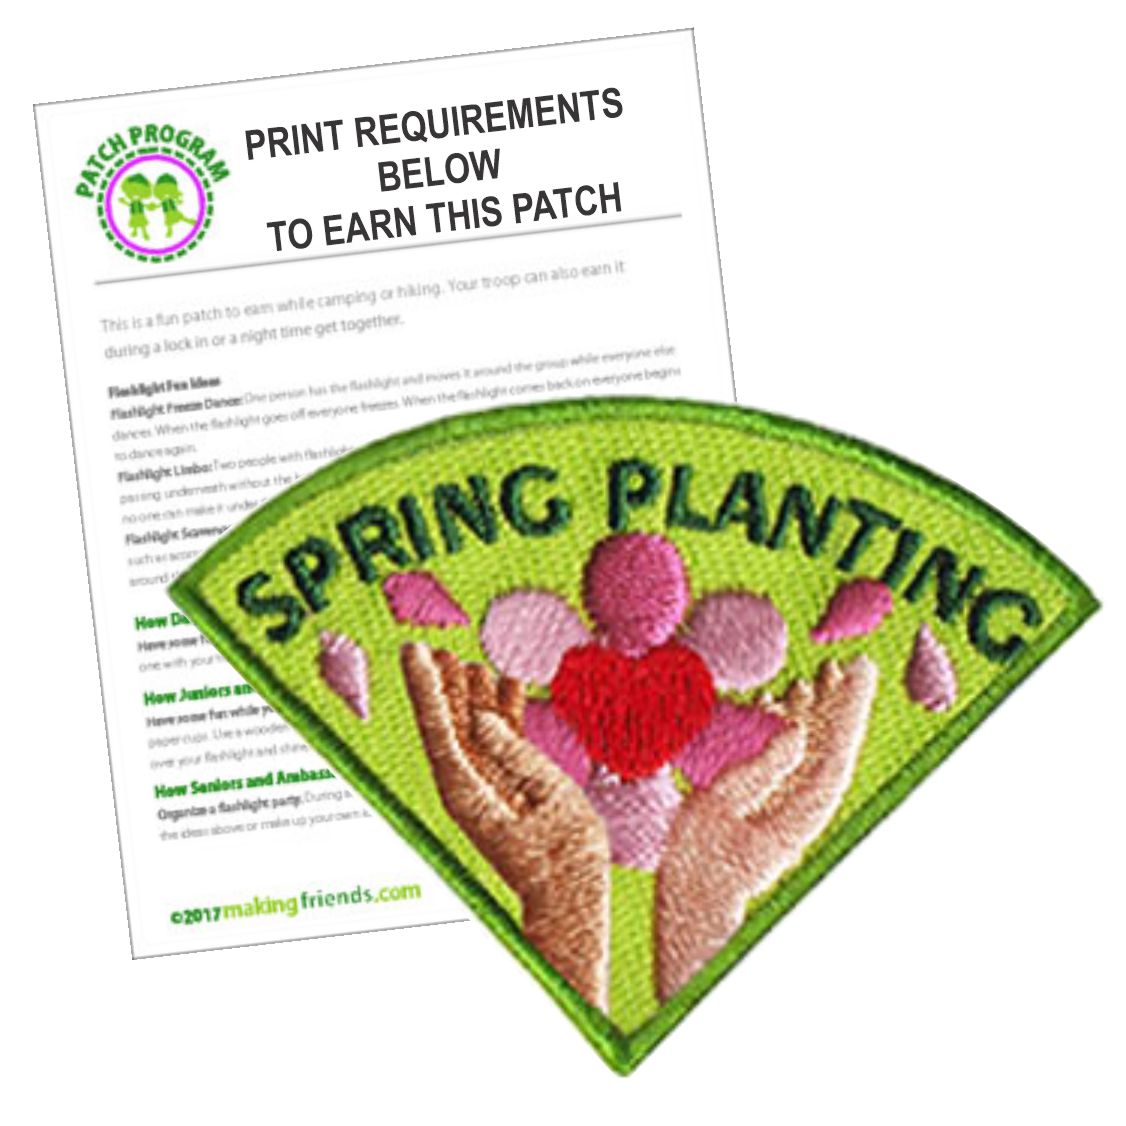 Girl Scout Spring Planting Patch Program